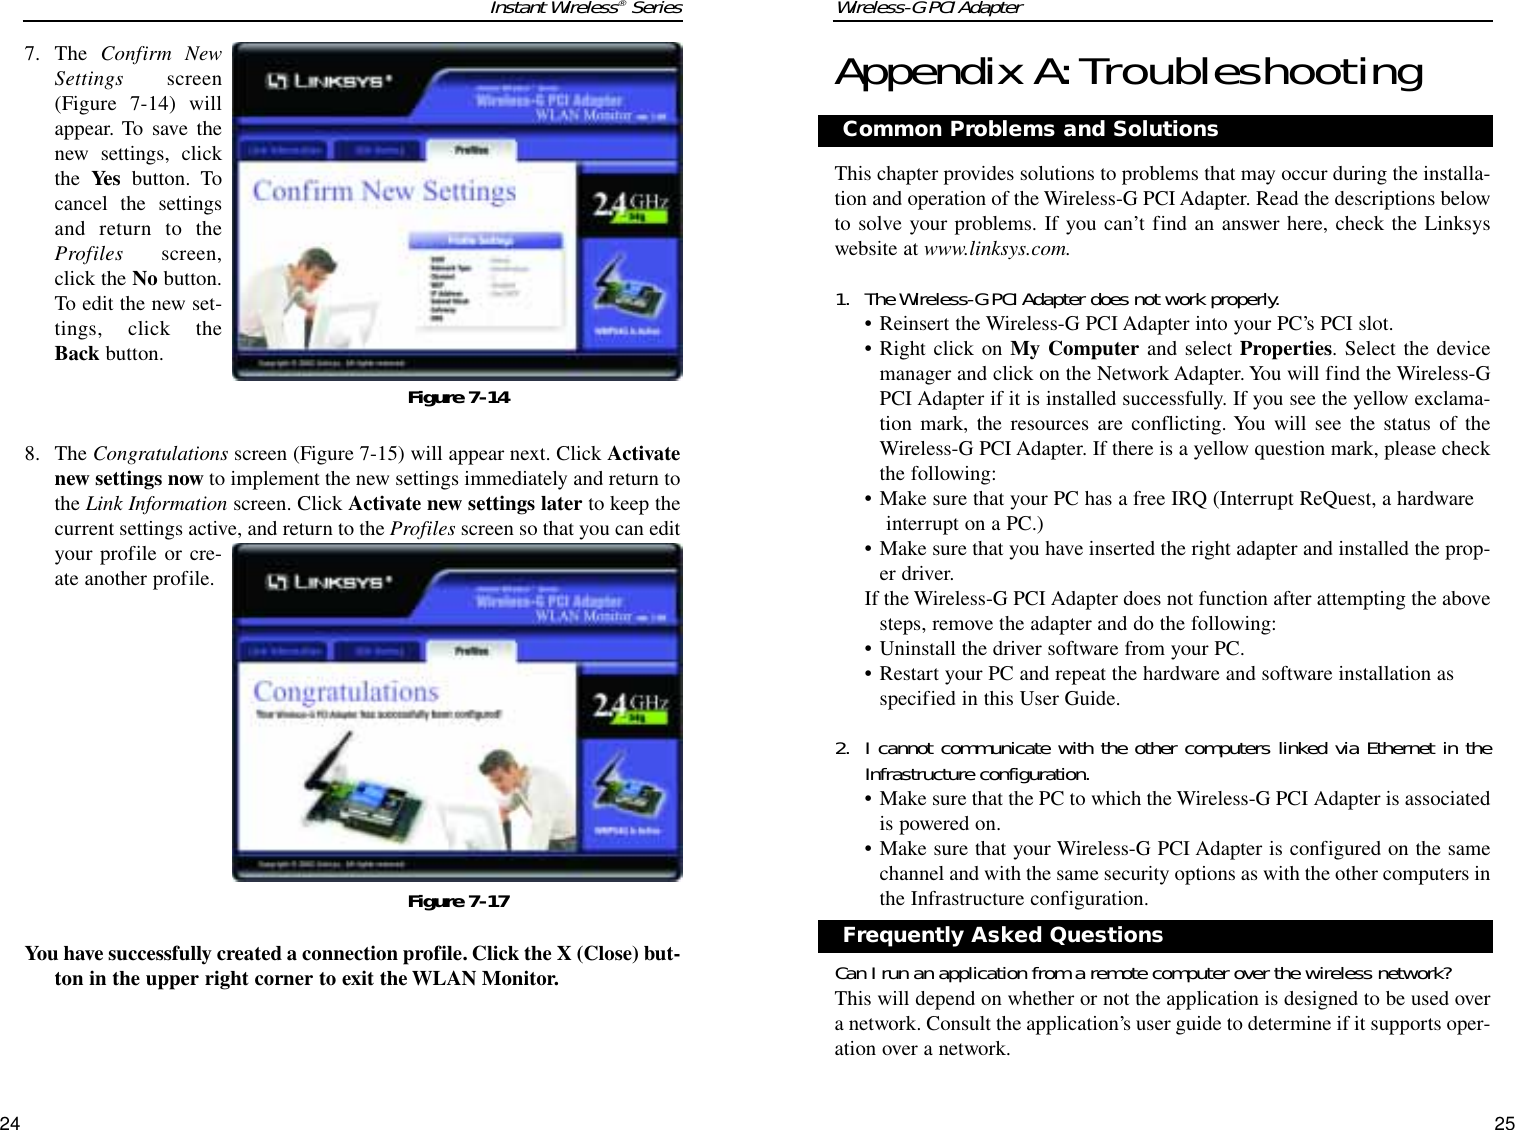 Wireless-G PCI AdapterAppendix A:TroubleshootingThis chapter provides solutions to problems that may occur during the installa-tion and operation of the Wireless-G PCI Adapter. Read the descriptions belowto solve your problems. If you can’t find an answer here, check the Linksyswebsite at www.linksys.com.1. The Wireless-G PCI Adapter does not work properly.• Reinsert the Wireless-G PCI Adapter into your PC’s PCI slot.• Right click on My Computer and select Properties. Select the devicemanager and click on the Network Adapter. You will find the Wireless-GPCI Adapter if it is installed successfully. If you see the yellow exclama-tion mark, the resources are conflicting. You will see the status of theWireless-G PCI Adapter. If there is a yellow question mark, please checkthe following:• Make sure that your PC has a free IRQ (Interrupt ReQuest, a hardware interrupt on a PC.) • Make sure that you have inserted the right adapter and installed the prop-er driver.If the Wireless-G PCI Adapter does not function after attempting the abovesteps, remove the adapter and do the following:• Uninstall the driver software from your PC.• Restart your PC and repeat the hardware and software installation asspecified in this User Guide.2. I cannot communicate with the other computers linked via Ethernet in theInfrastructure configuration.• Make sure that the PC to which the Wireless-G PCI Adapter is associatedis powered on.• Make sure that your Wireless-G PCI Adapter is configured on the samechannel and with the same security options as with the other computers inthe Infrastructure configuration.Can I run an application from a remote computer over the wireless network?This will depend on whether or not the application is designed to be used overa network. Consult the application’s user guide to determine if it supports oper-ation over a network.25Instant Wireless®Series24Common Problems and Solutions7. The  Confirm NewSettings screen(Figure 7-14) willappear. To save thenew settings, clickthe Yes button. Tocancel the settingsand return to theProfiles screen,click the No button.To edit the new set-tings, click theBack button.8. The Congratulations screen (Figure 7-15) will appear next. Click Activatenew settings now to implement the new settings immediately and return tothe Link Information screen. Click Activate new settings later to keep thecurrent settings active, and return to the Profiles screen so that you can edityour profile or cre-ate another profile. You have successfully created a connection profile. Click the X (Close) but-ton in the upper right corner to exit the WLAN Monitor.Figure 7-14Figure 7-17Frequently Asked Questions